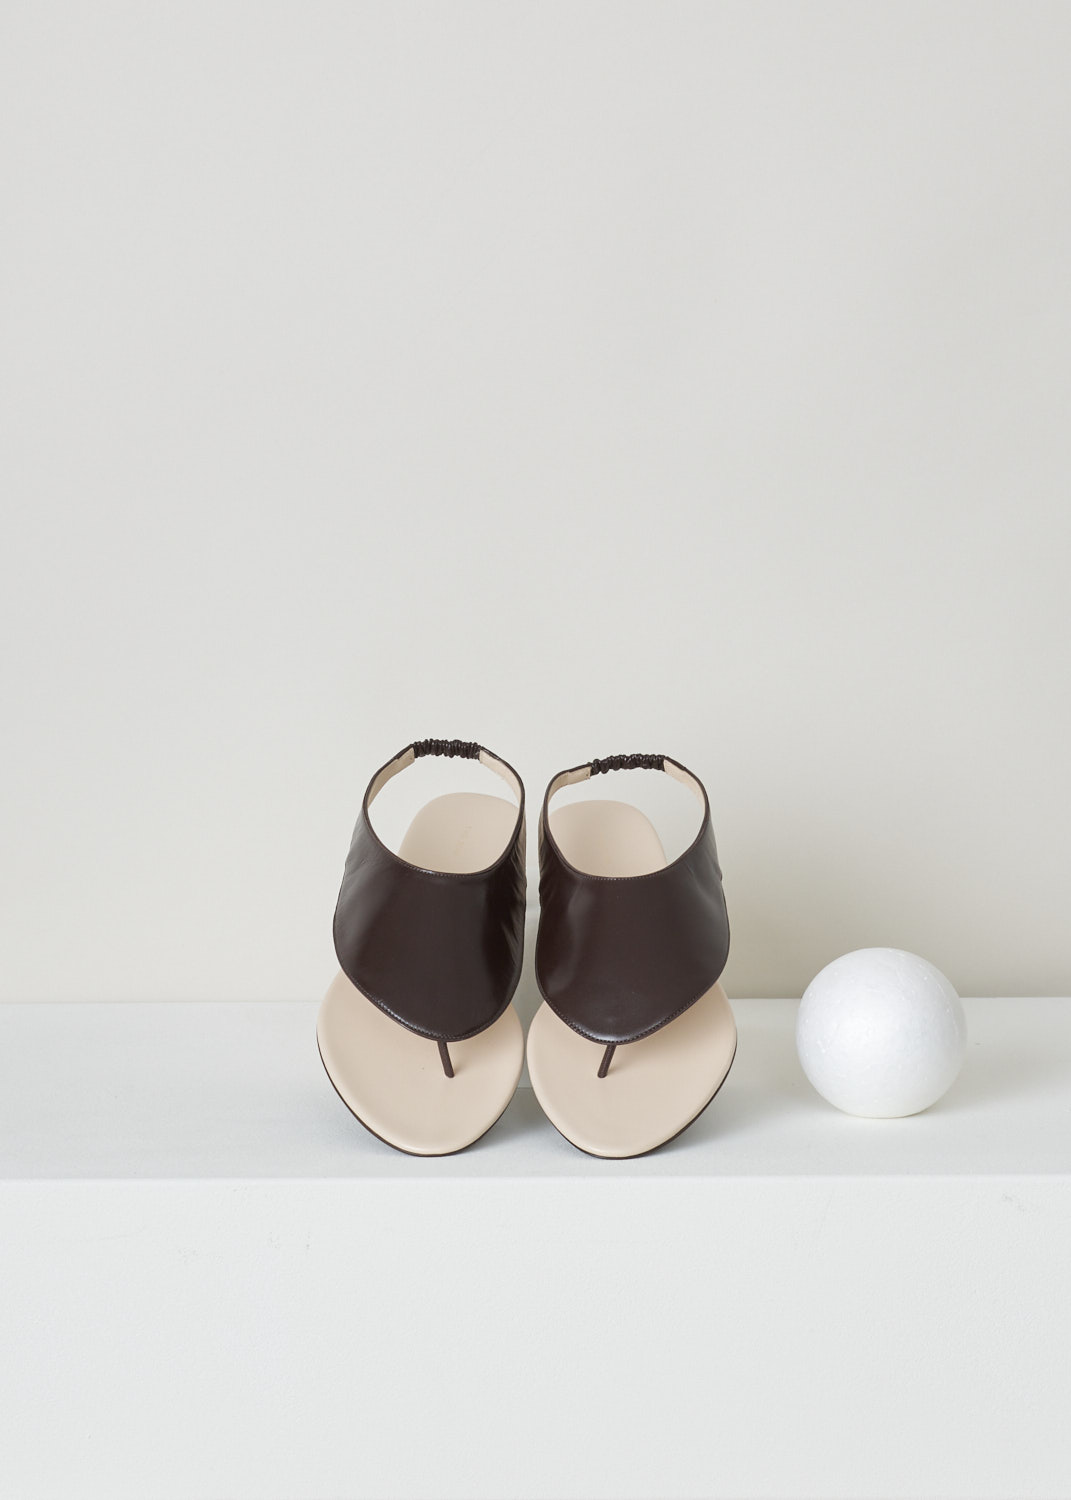 The Row, Dark brown ravello thong sandal, F1155_L35_DBR, brown, top, Ravelo slip-on sandals from The Row. Coloured to a lovely shade of dark brown. Featuring a round and open toe vamp and comes with an elastic slingback strap. 